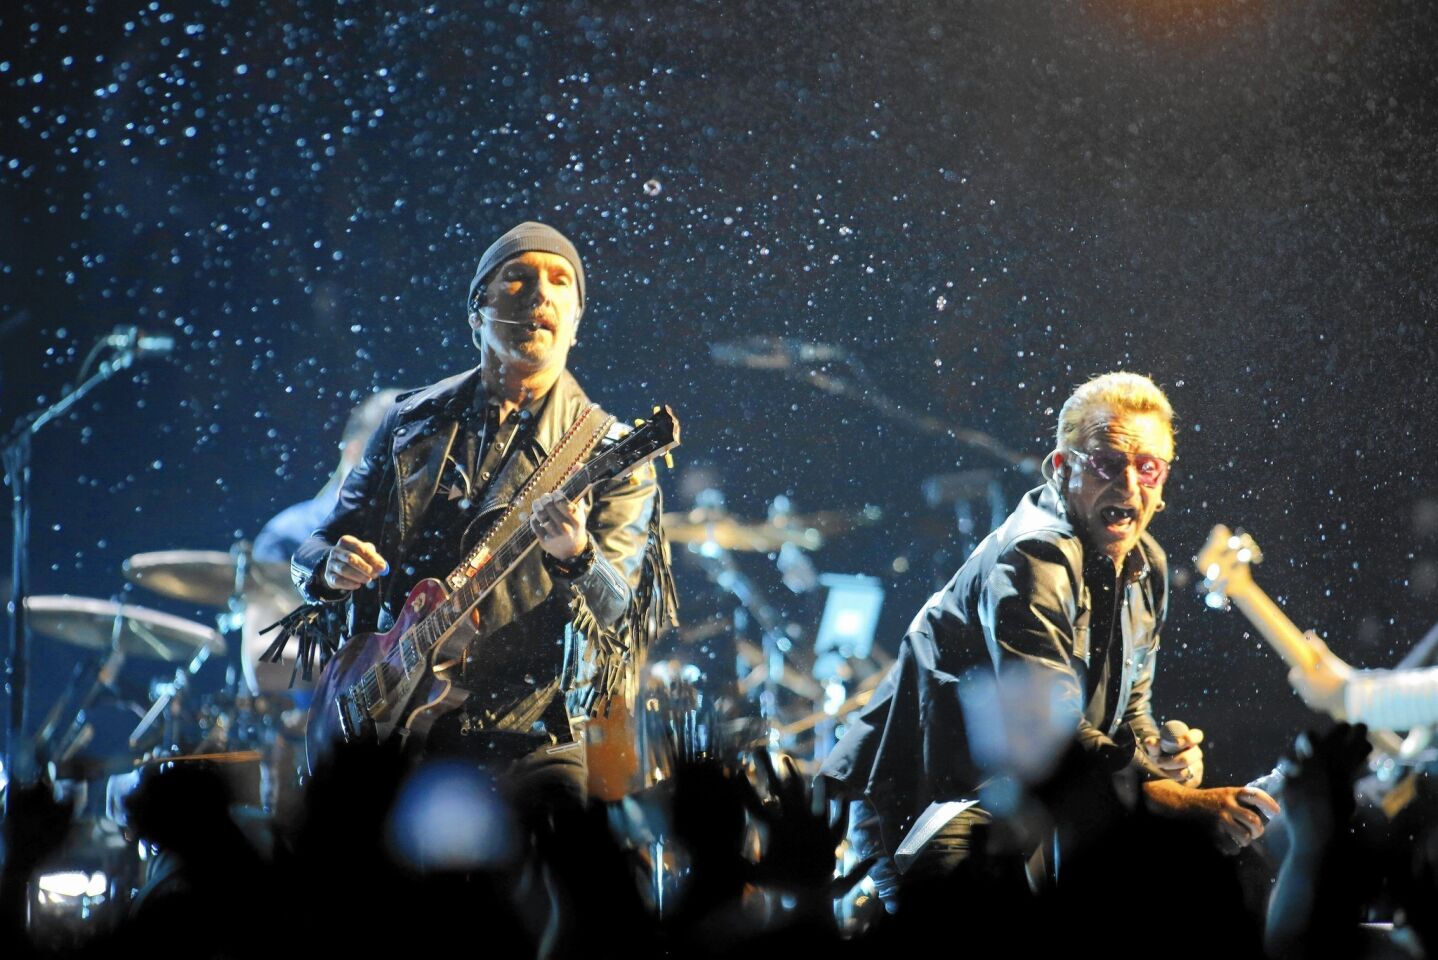 U2 guitarist The Edge, left, and lead singer Bono perform at the Forum on Tuesday, May 26. It was the first night of five at the venue.